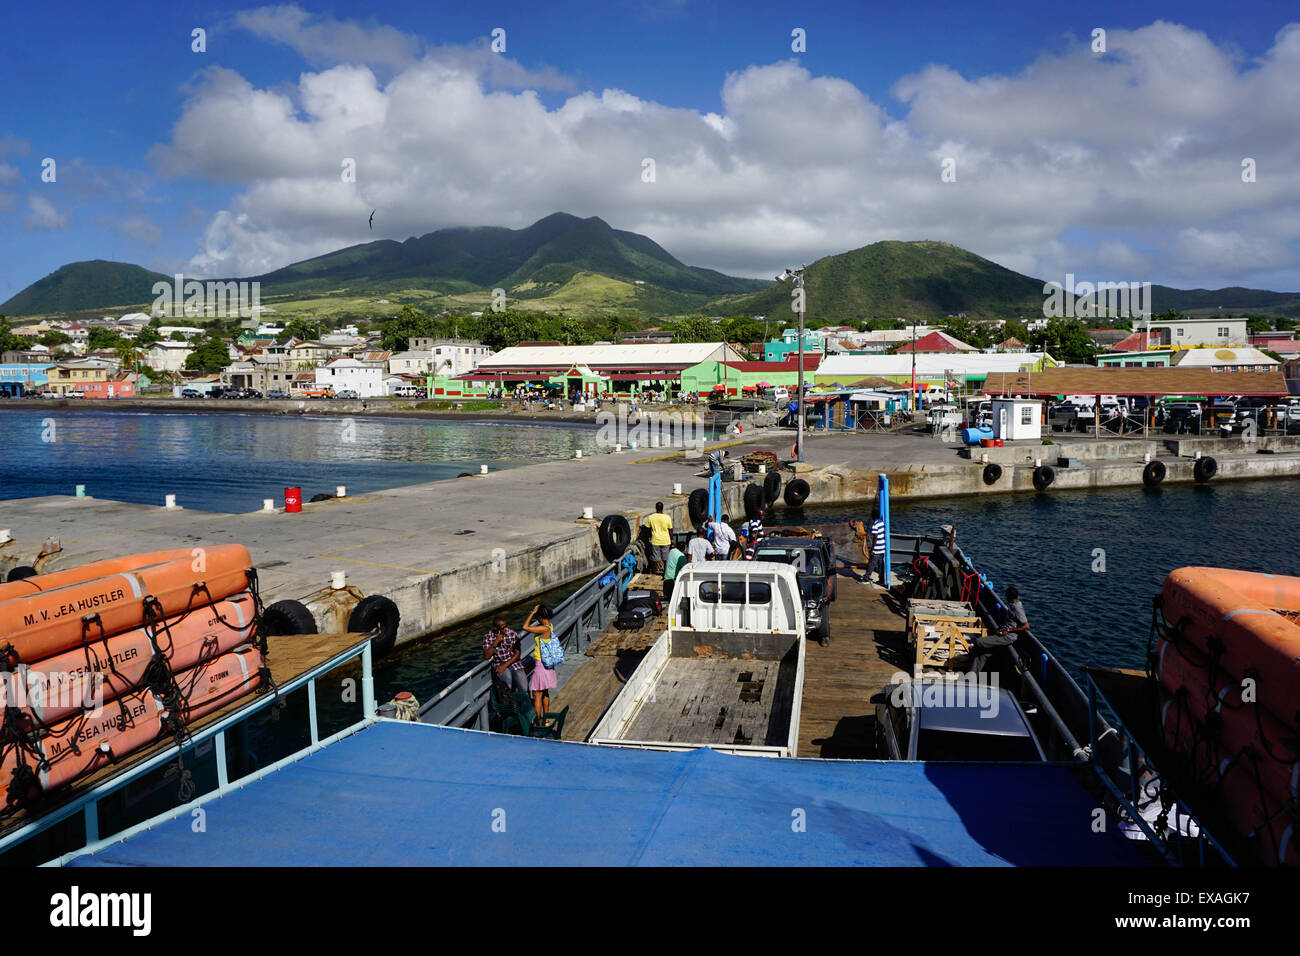 Basseterre, St. Kitts, St. Kitts and Nevis, Leeward Islands, West Indies, Caribbean, Central America Stock Photo